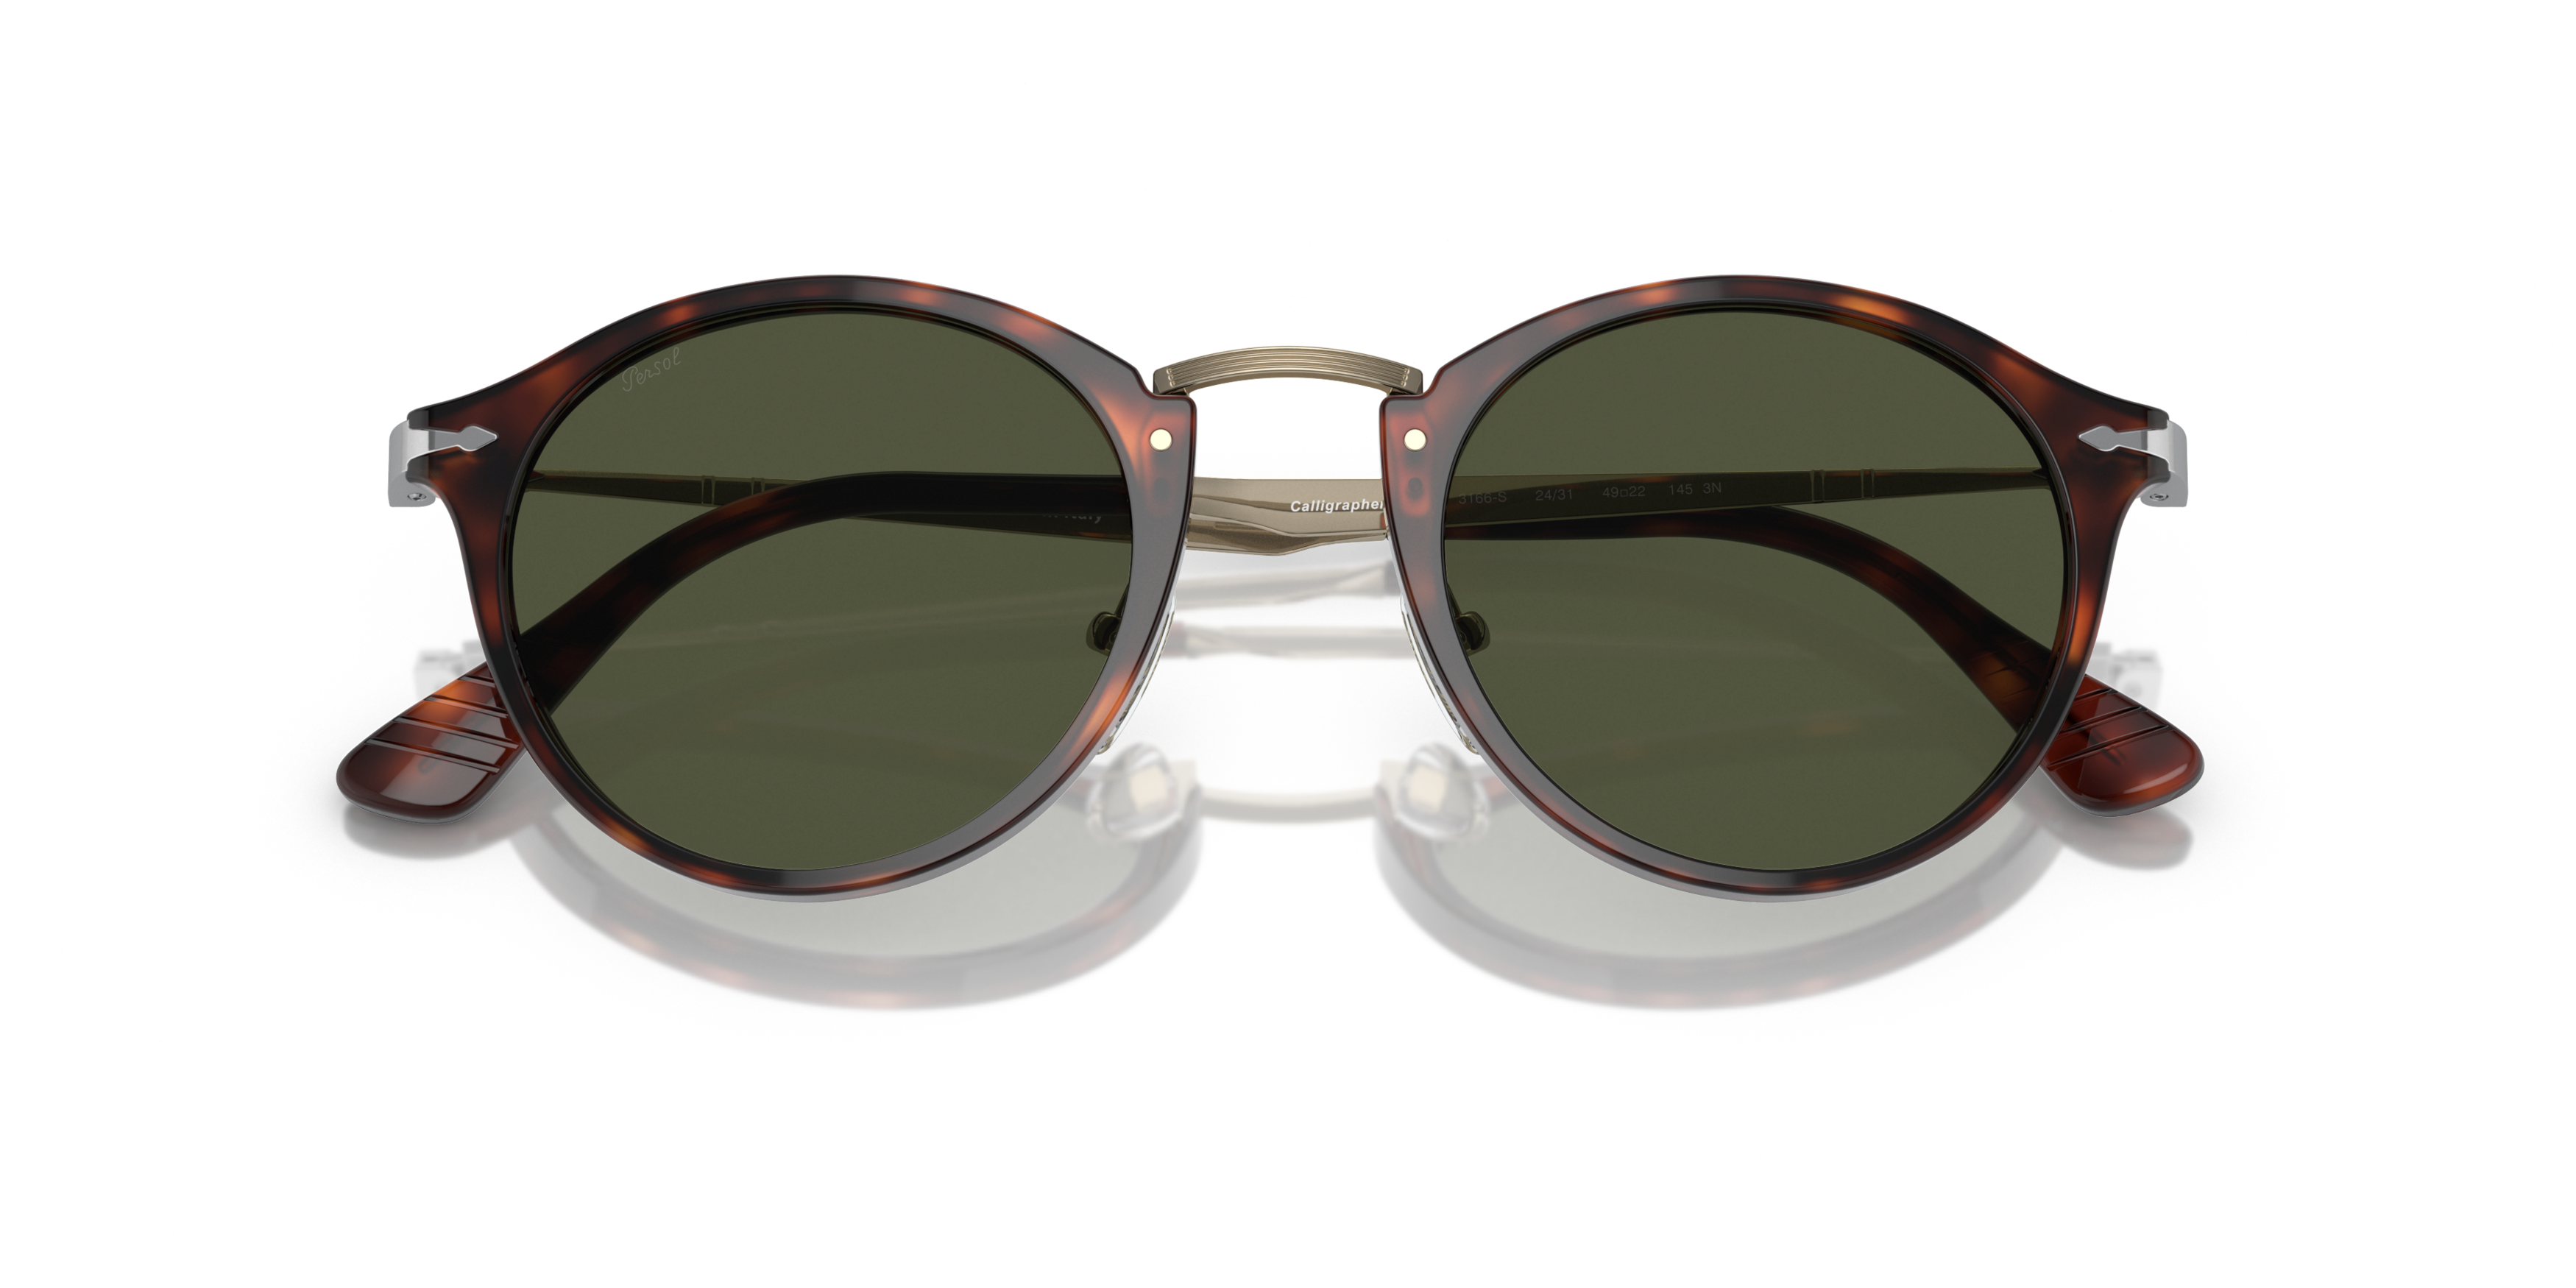 [products.image.folded] Persol 0PO3166S 24/31